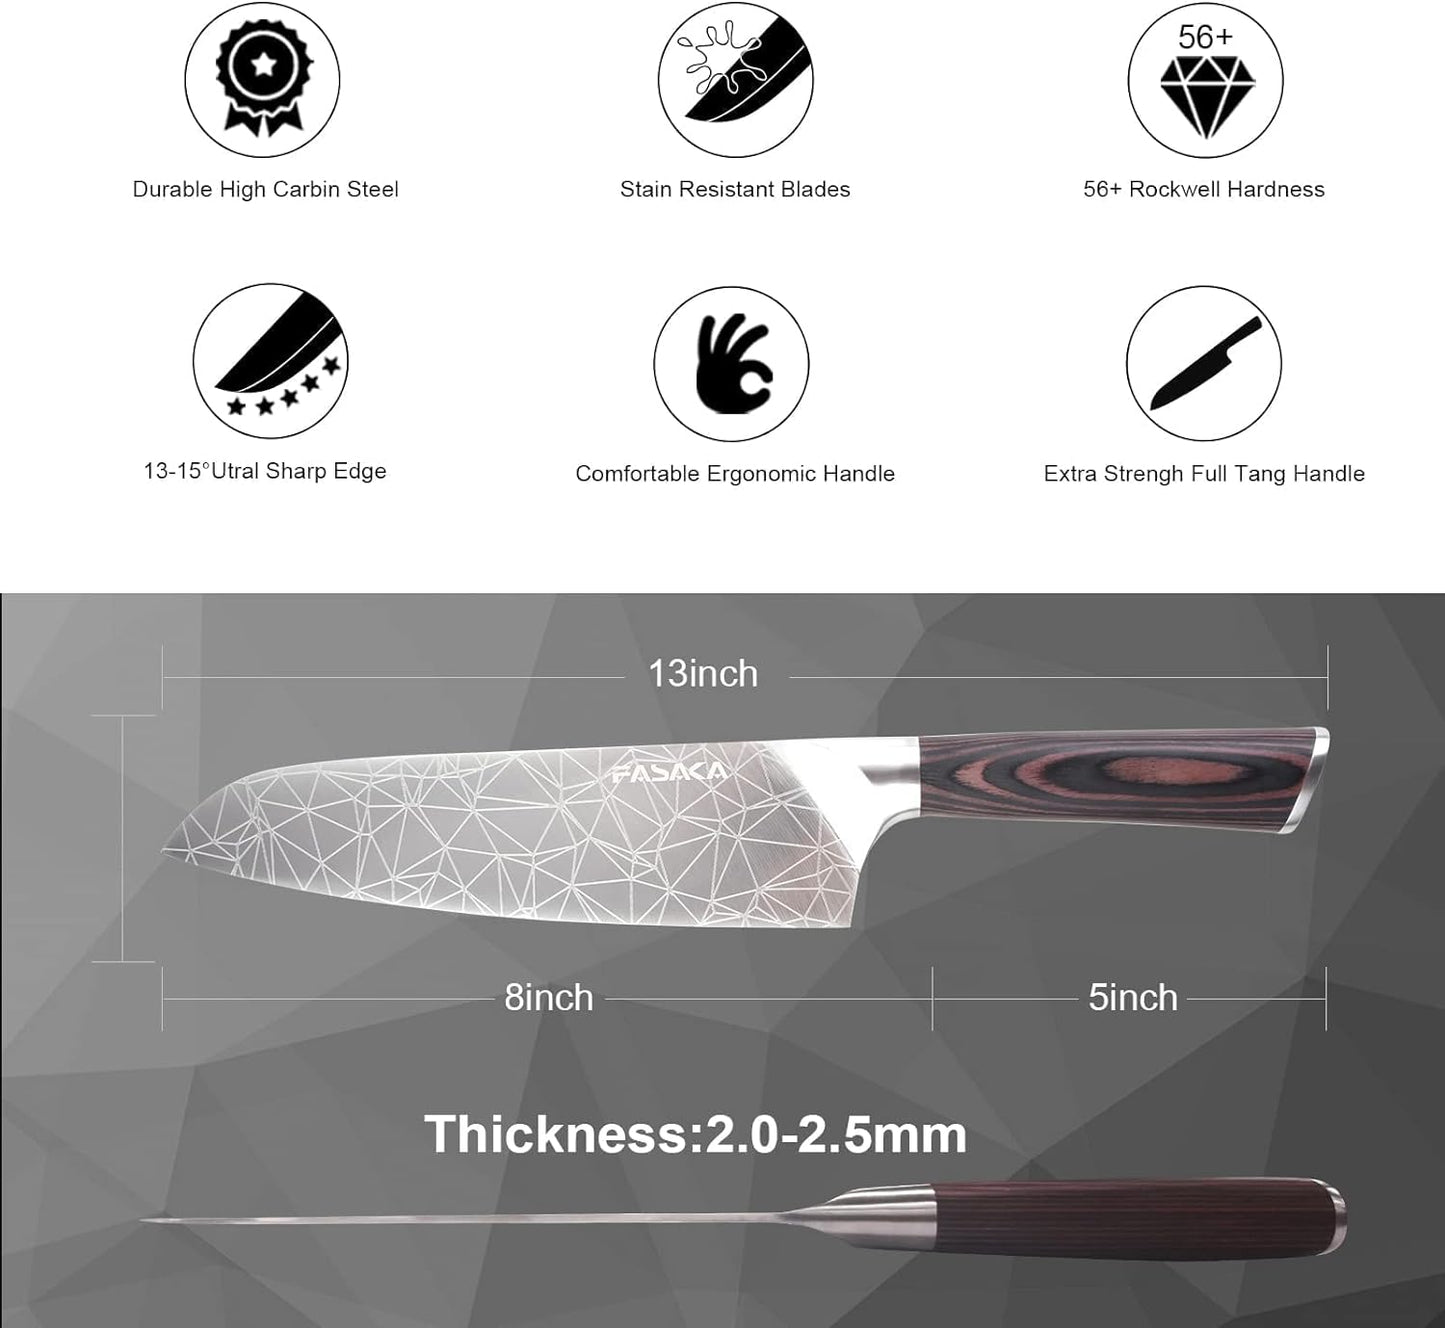 8 Inch Santoku Knife, Japanese Chef Knife, Professional Knife for Kitchen, German High Carbon Stainless Steel Full Tang Handle Sharp Durable Kitchen Knife Ideal for Housewarming Gift